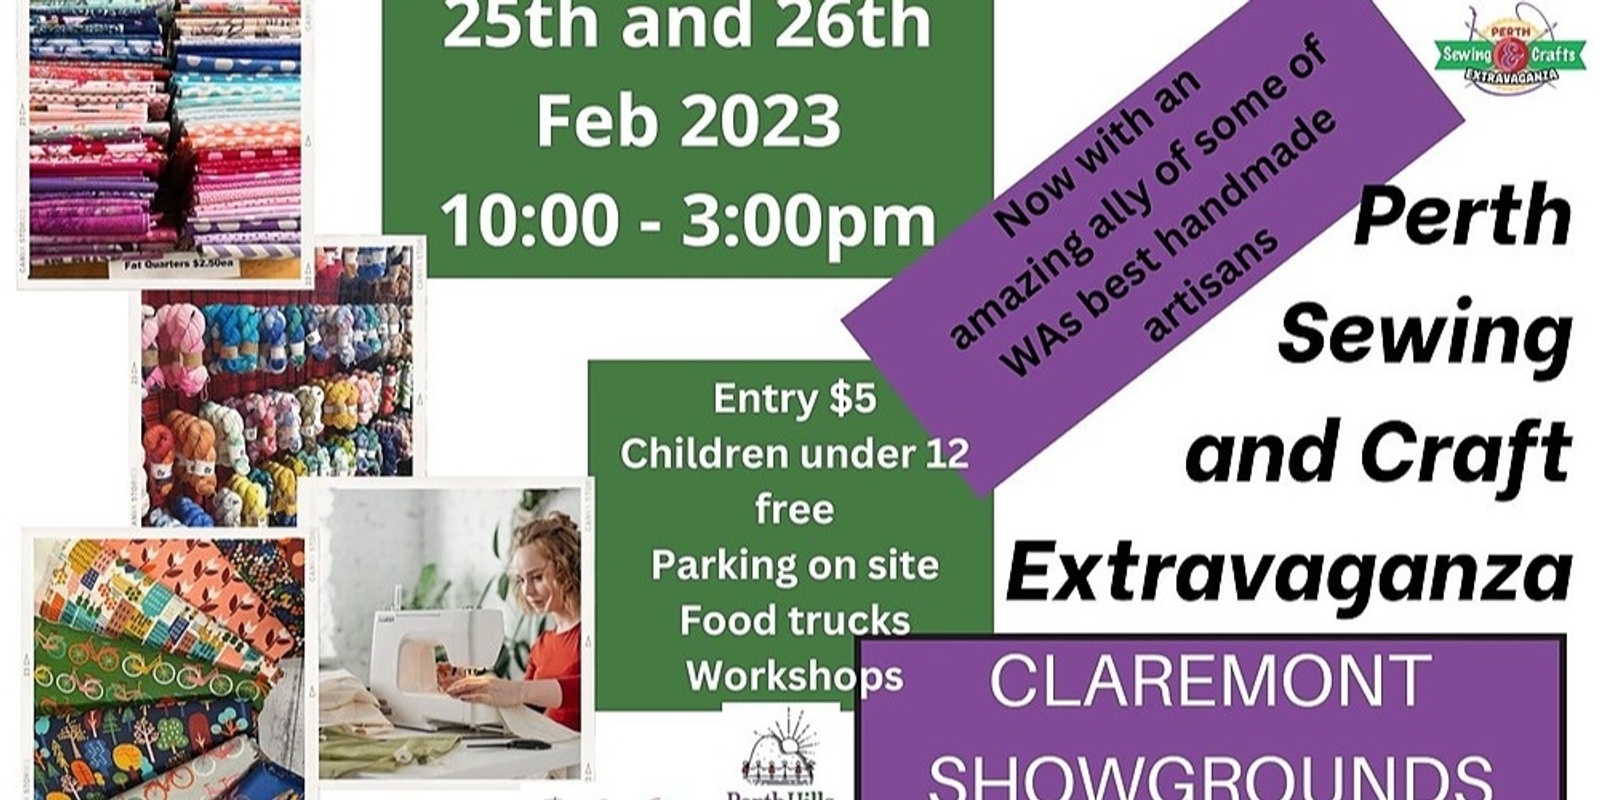 Banner image for Perth Sewing and Craft Extravaganza